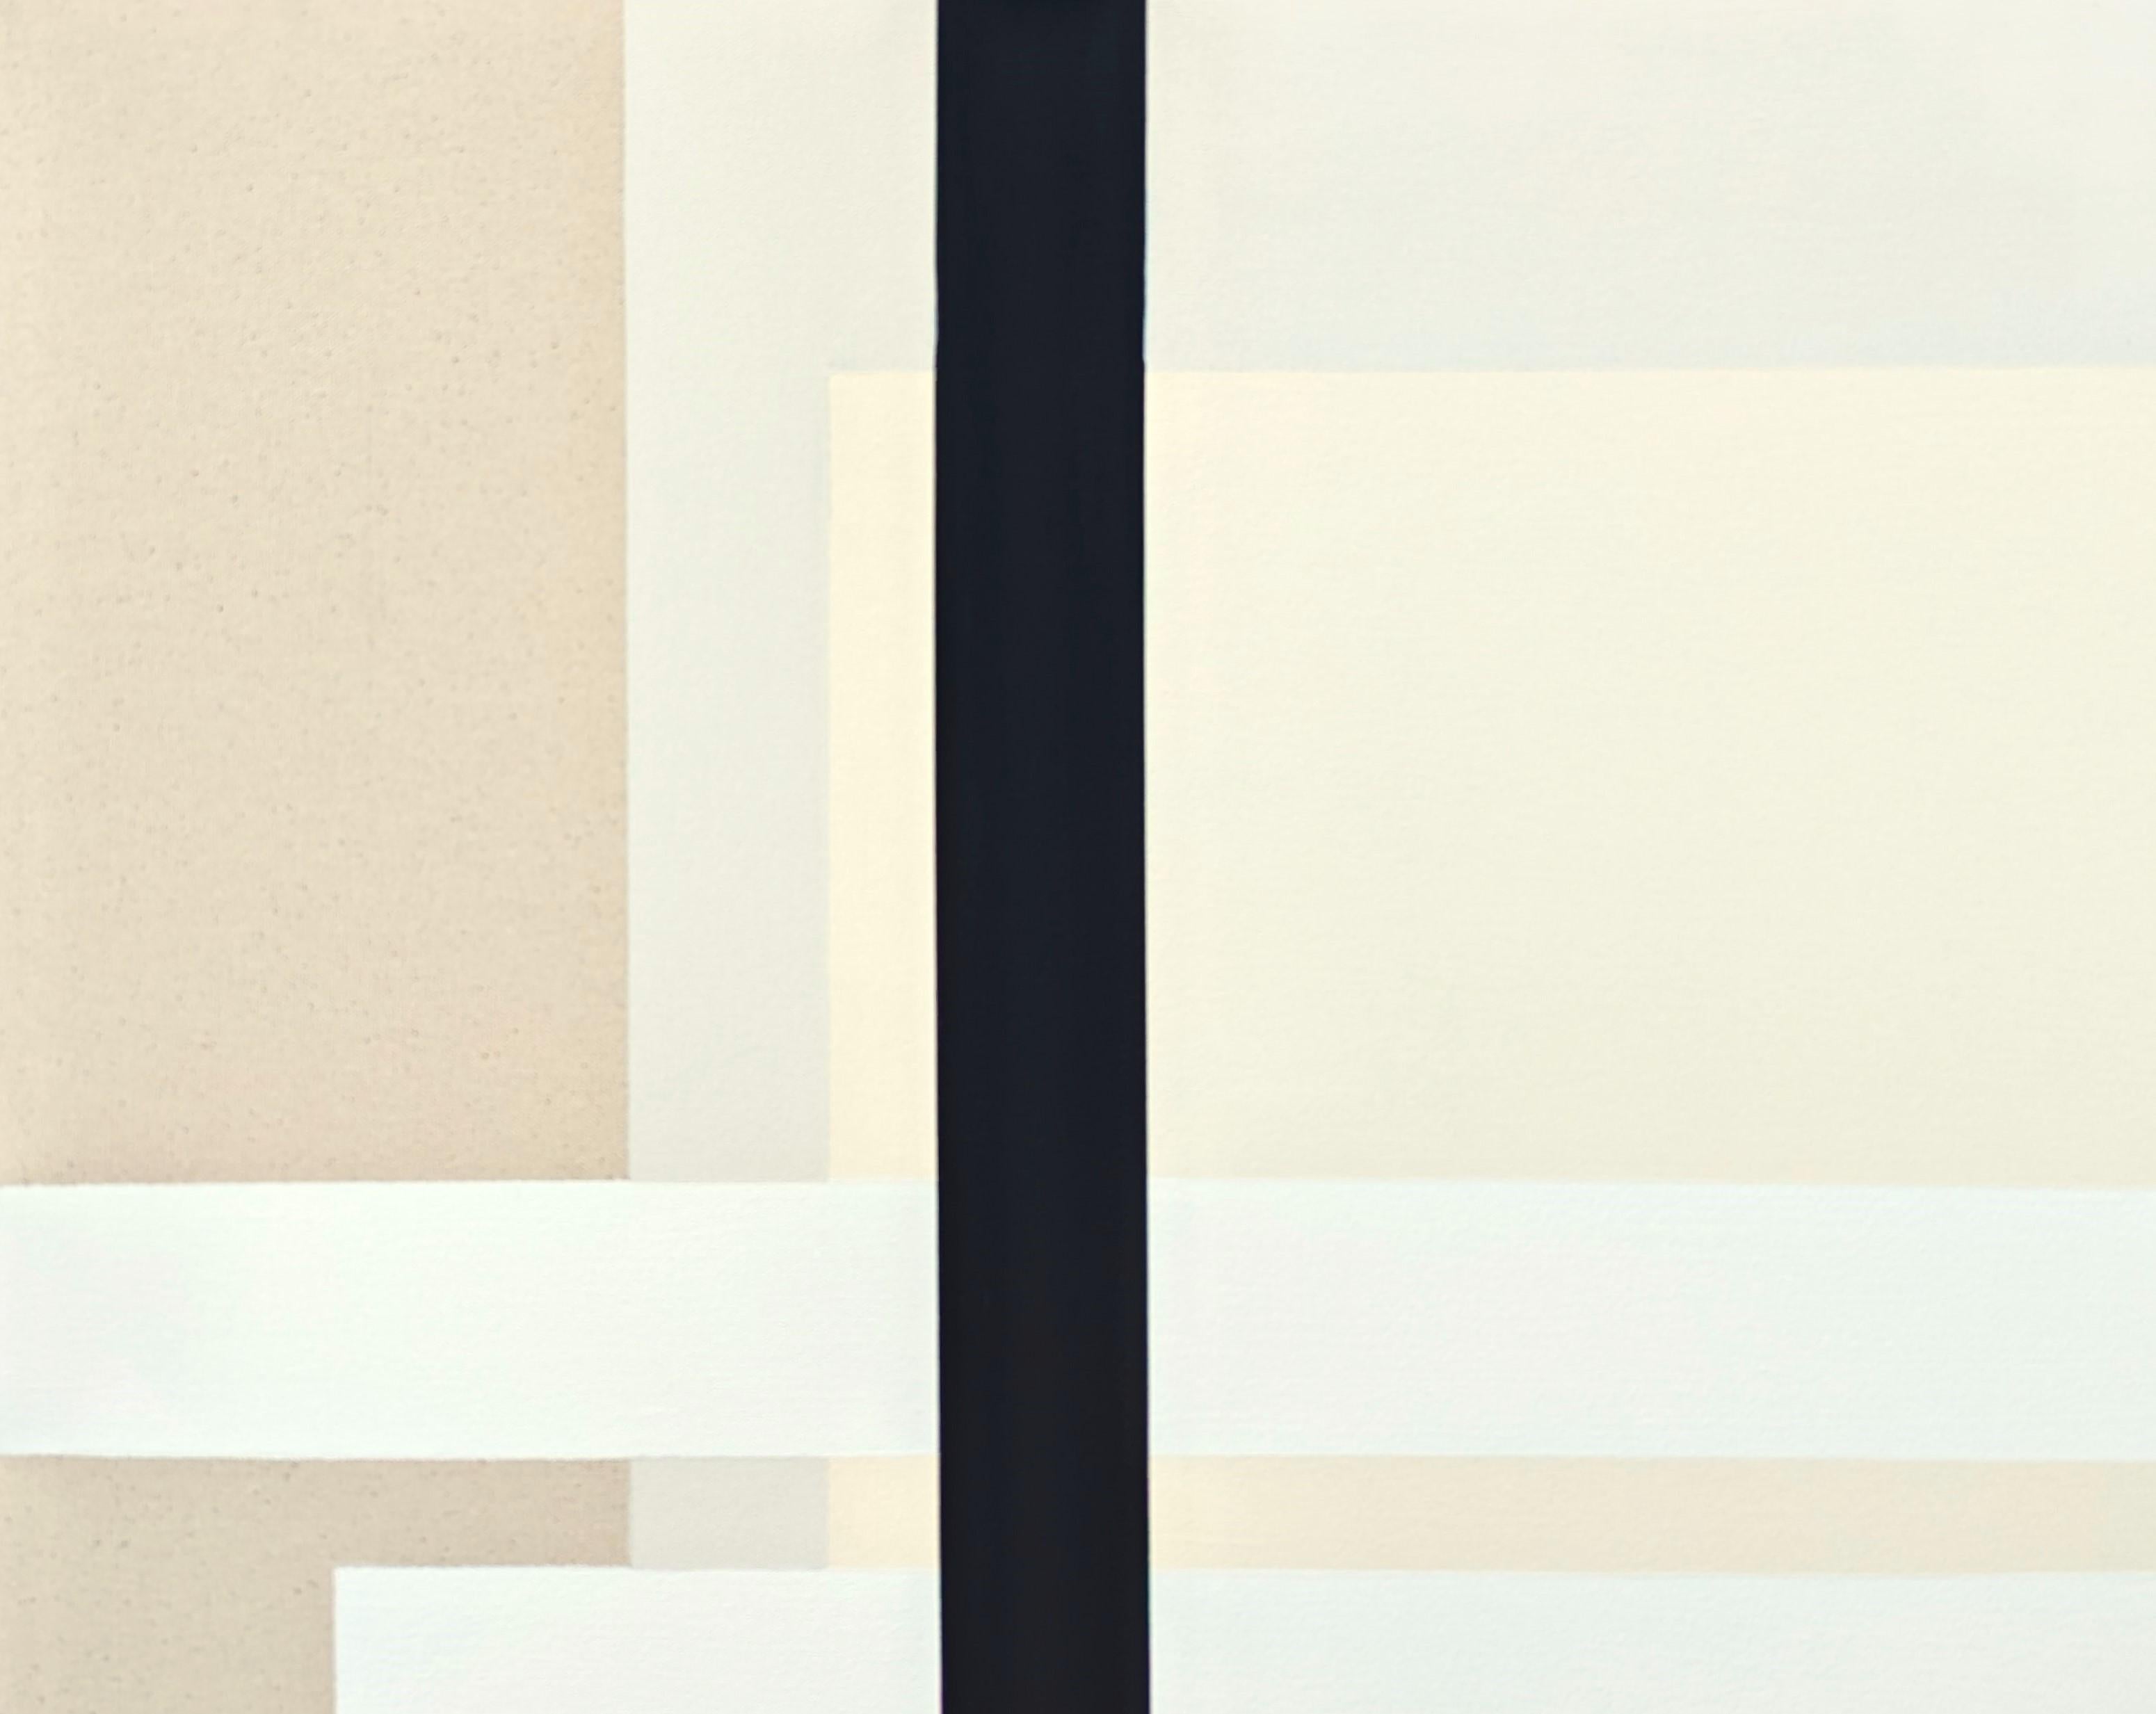 Contemporary abstract geometric painting by Houston-based artist Holland Geibel. The work features layers of rectangular shapes in various neutral tones of tan, white, and black. Signed, titled, and dated on the reverse. Currently unframed, but